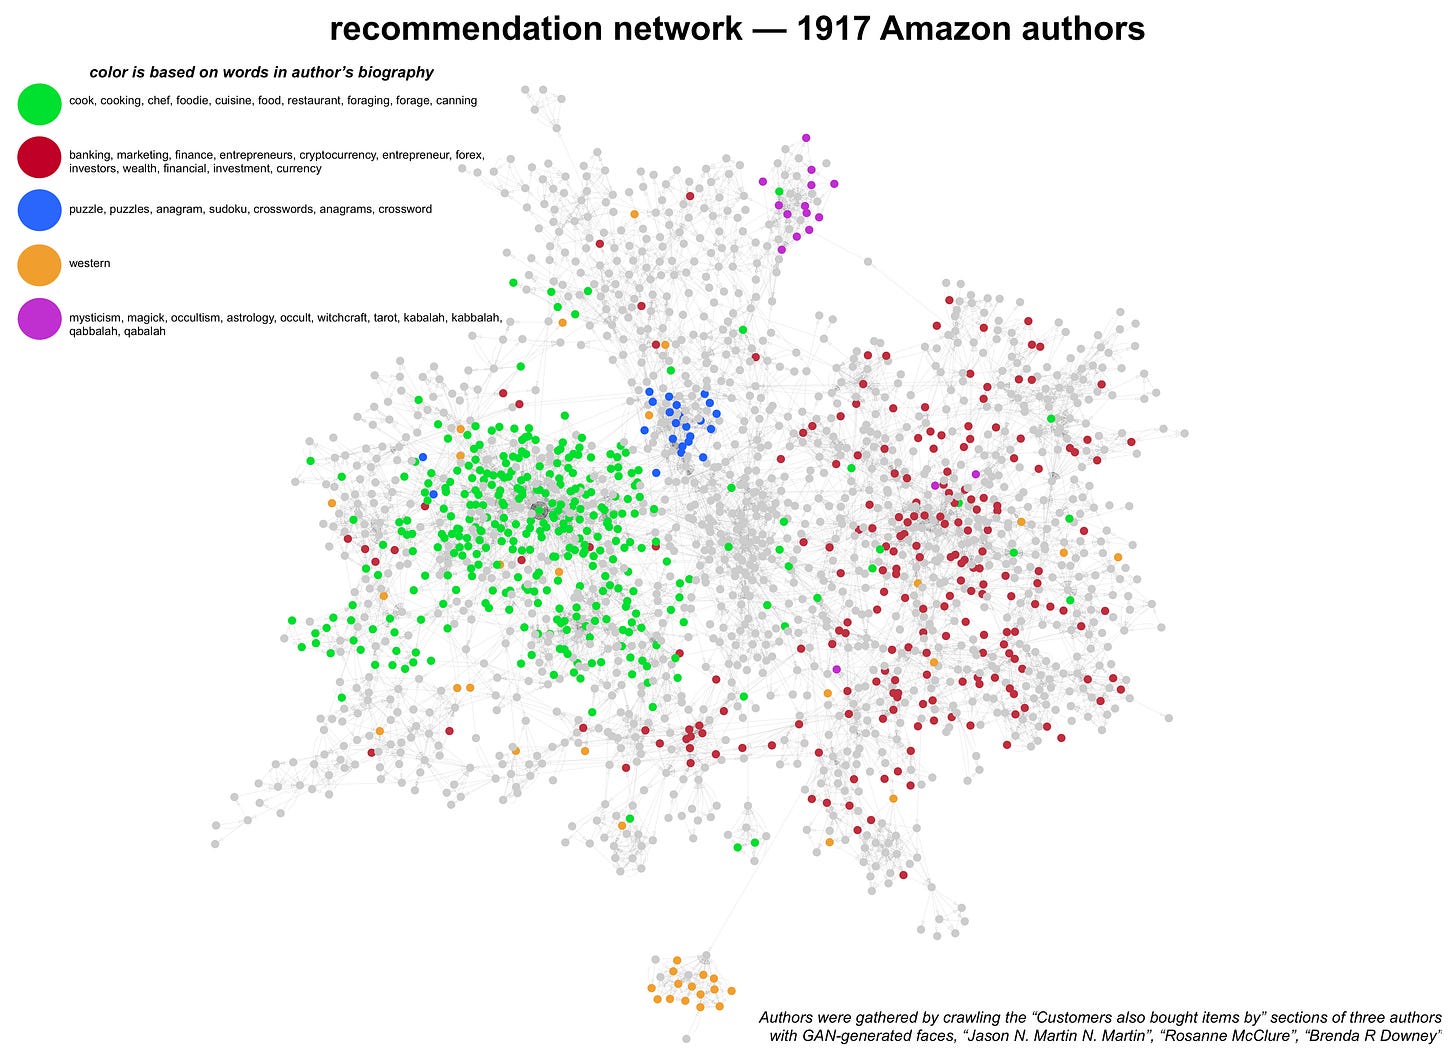 network diagram showing the recommendation relationships between 1917 authors reachable via 6 degrees of separation or less from three authors with GAN-generated faces